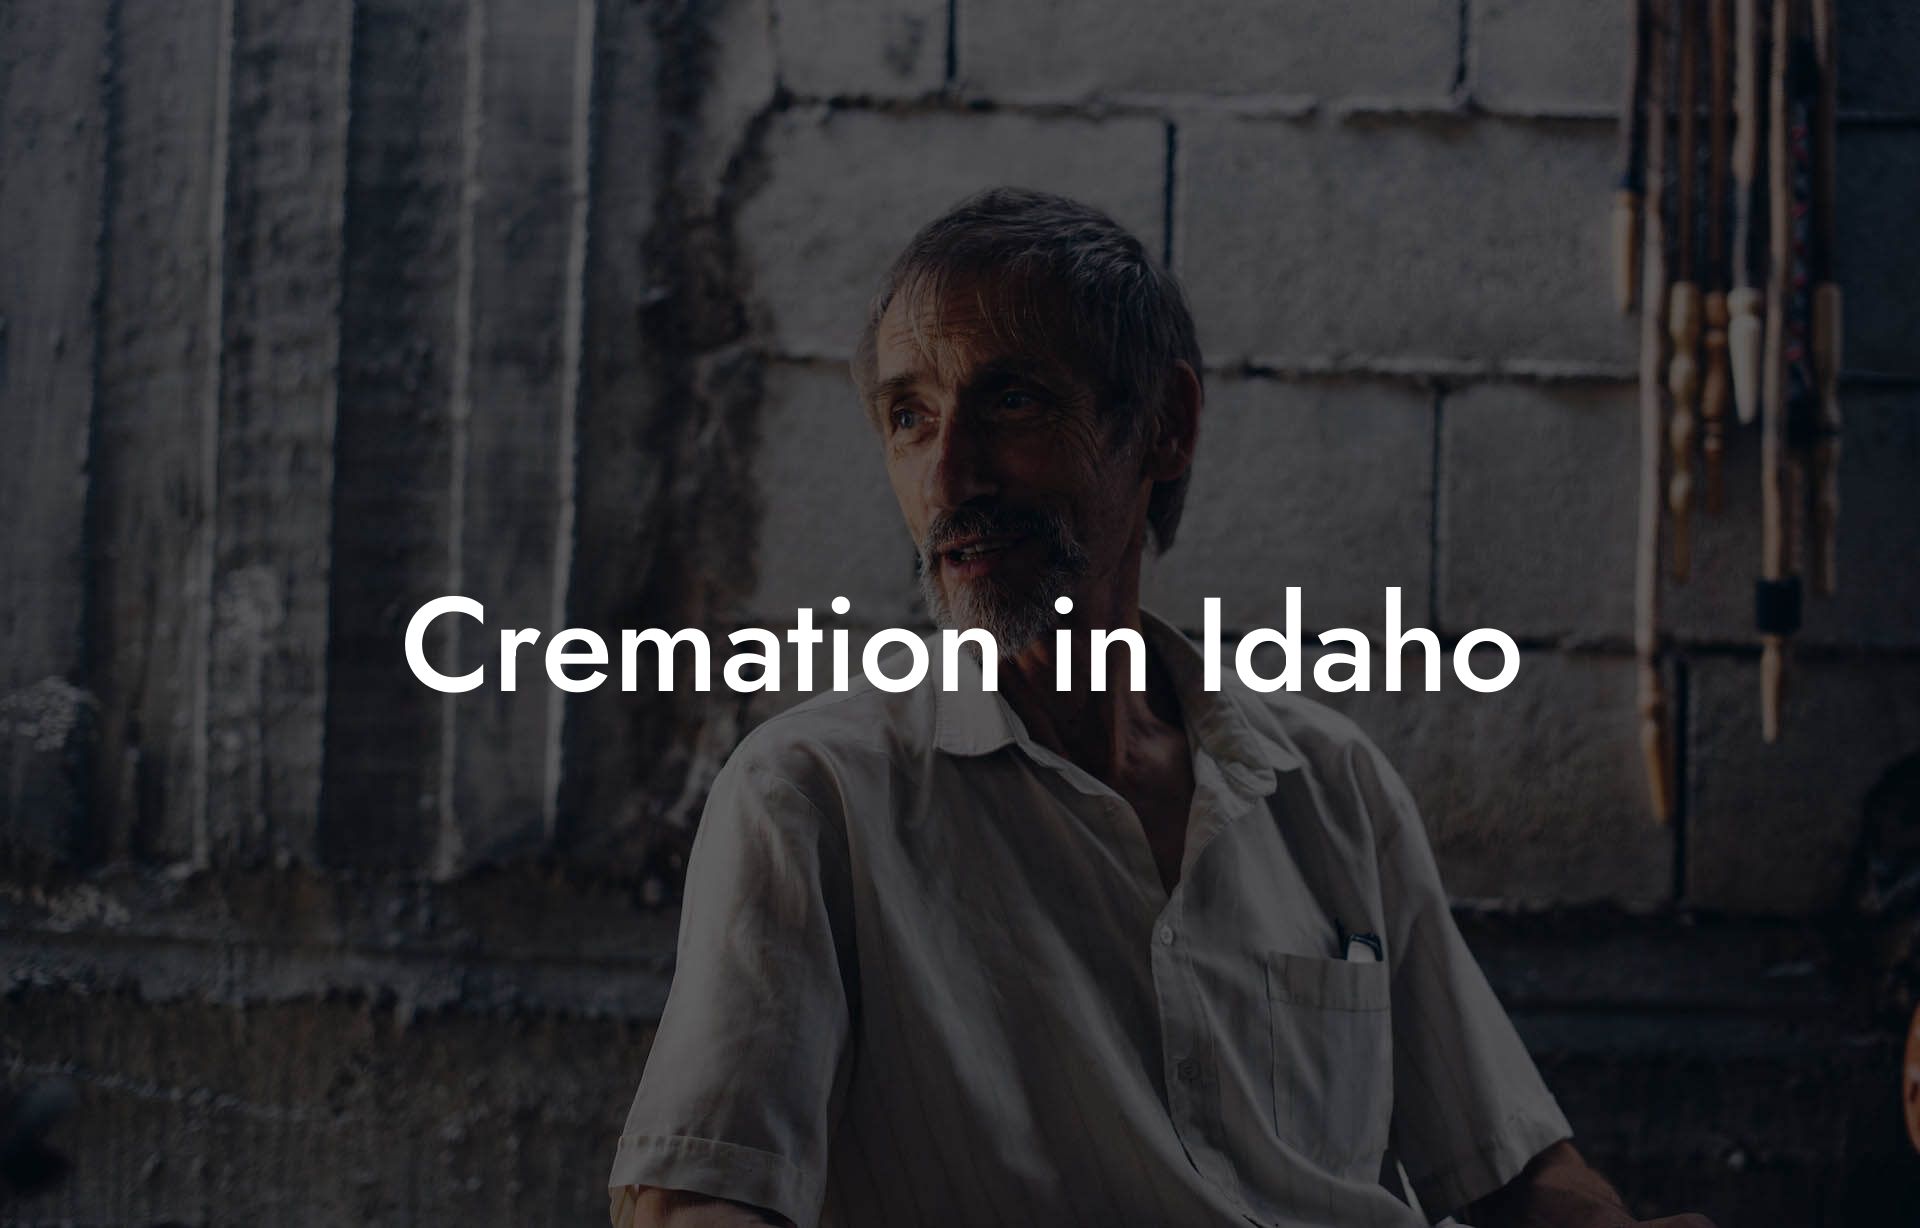 Cremation in Idaho